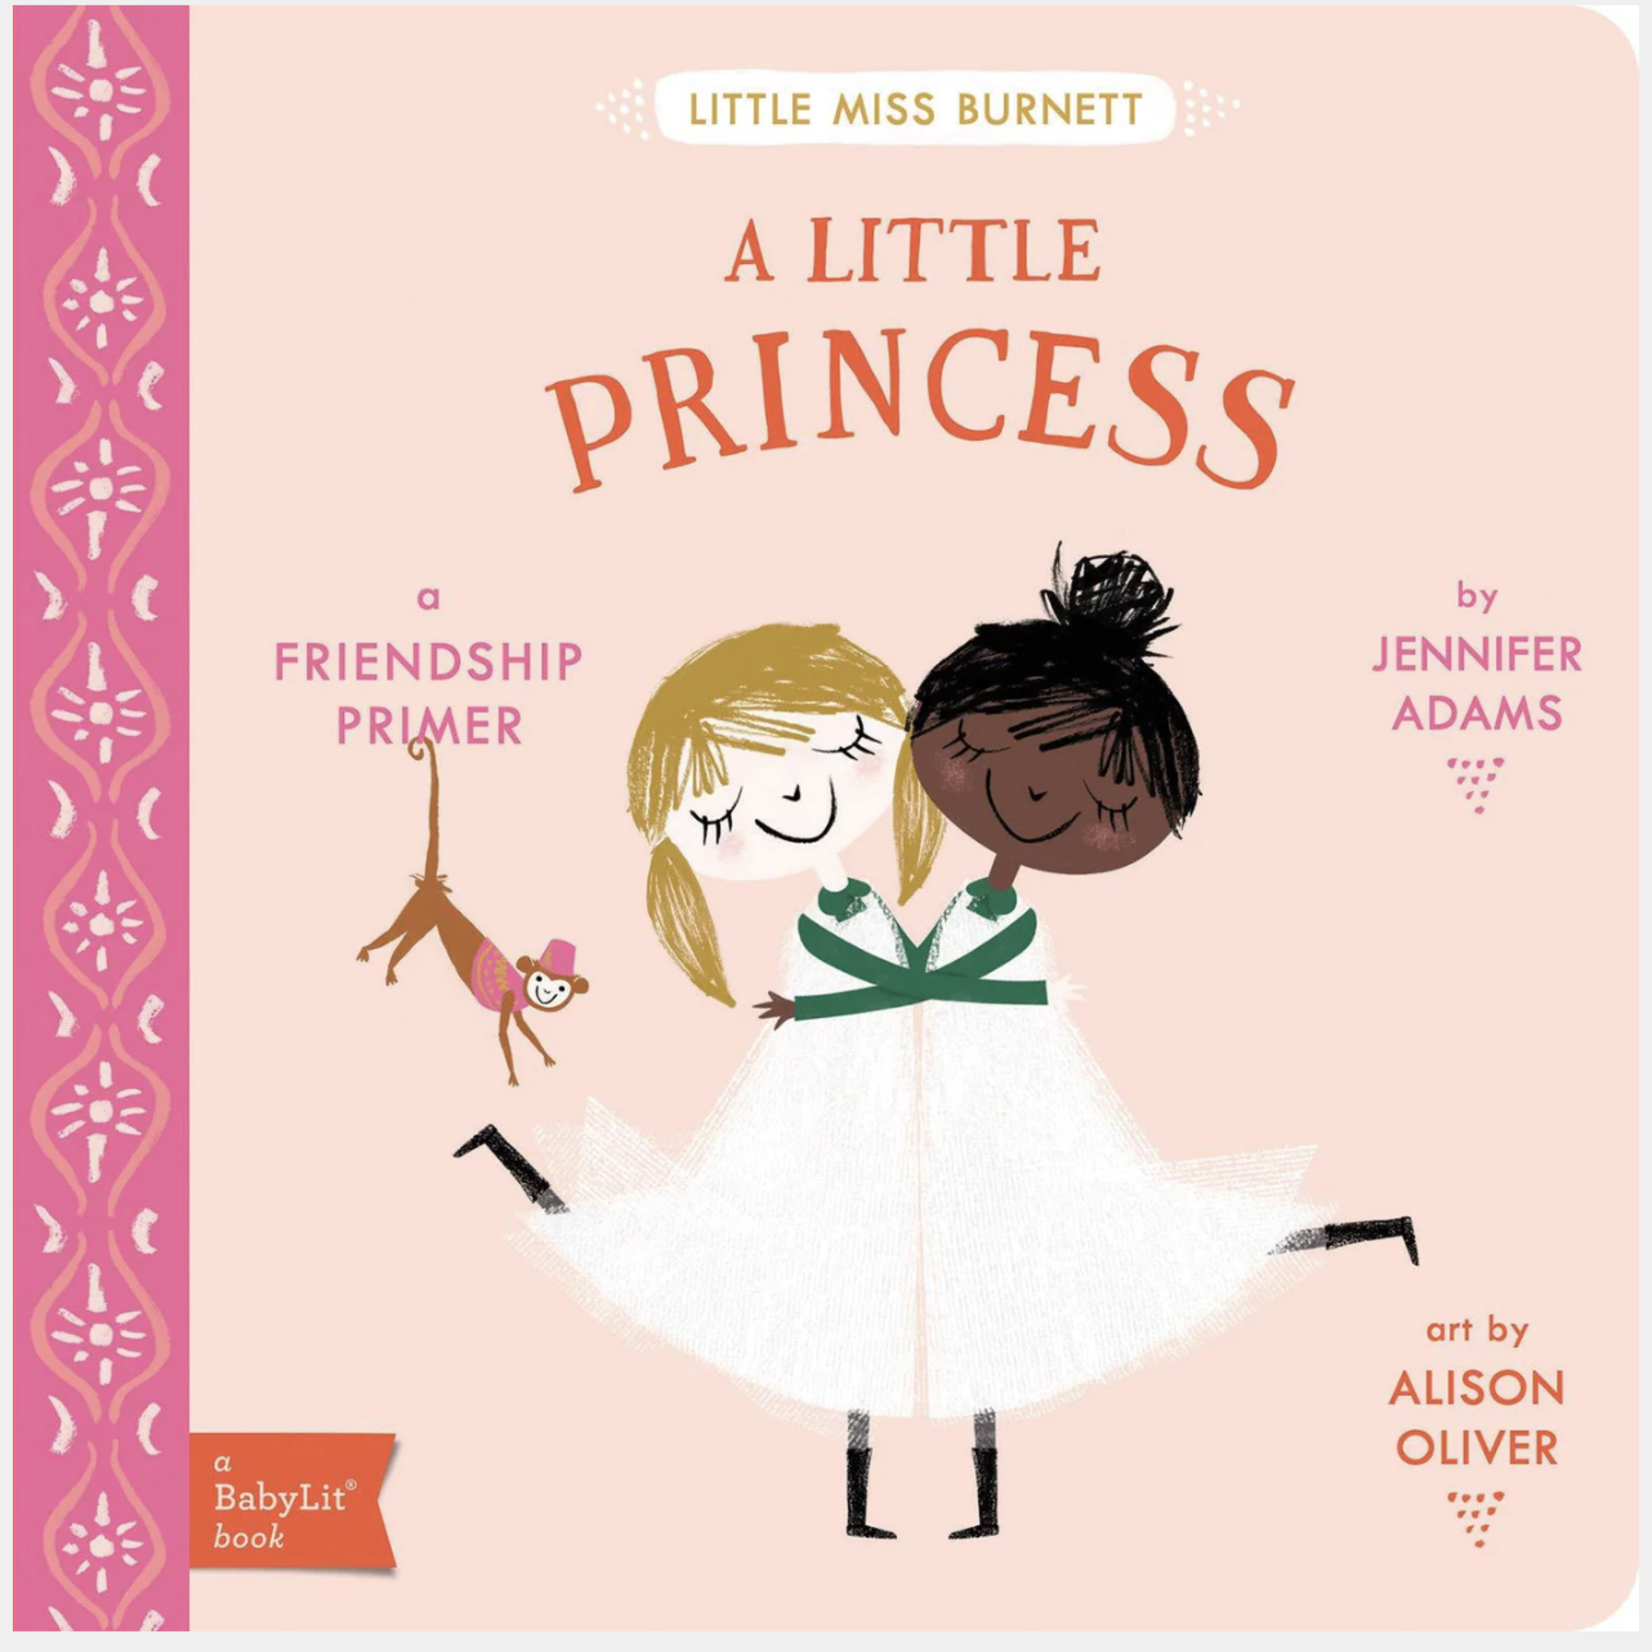 Gibbs Smith Publisher A Little Princess a Babylit book